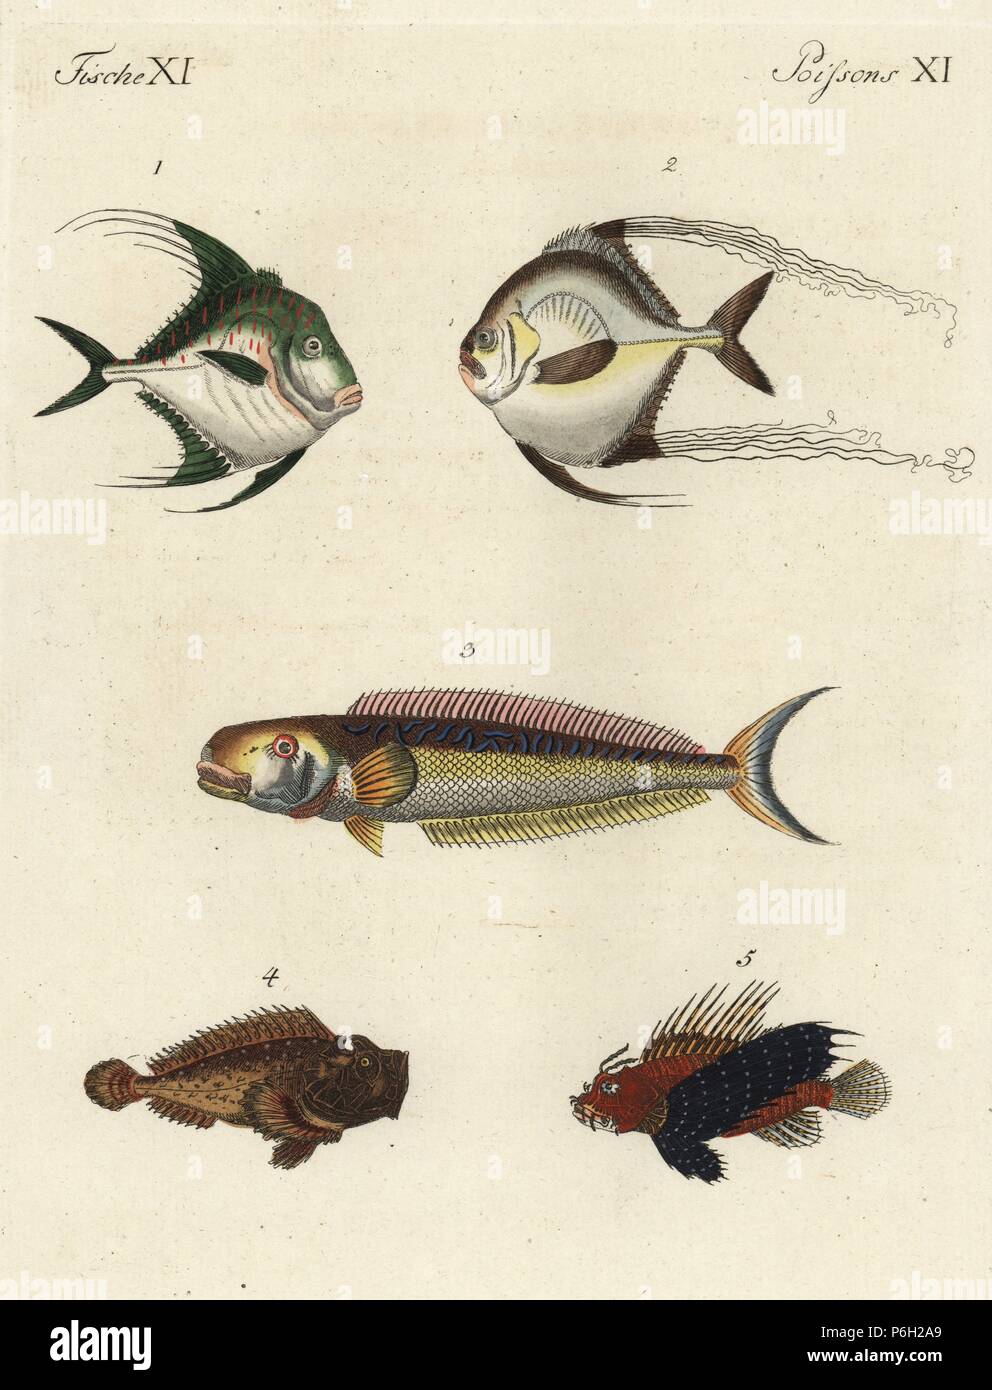 African pompano, Alectis ciliaris 1,2, sand tilefish, Malacanthus plumieri 3, estuarine stonefish, Synanceia horrida 4, and red lionfish, Pterois volitans 5. Handcoloured copperplate engraving from Friedrich Johann Bertuch's Bilderbuch fur Kinder (Picture Book for Children), Weimar, 1795. Stock Photo